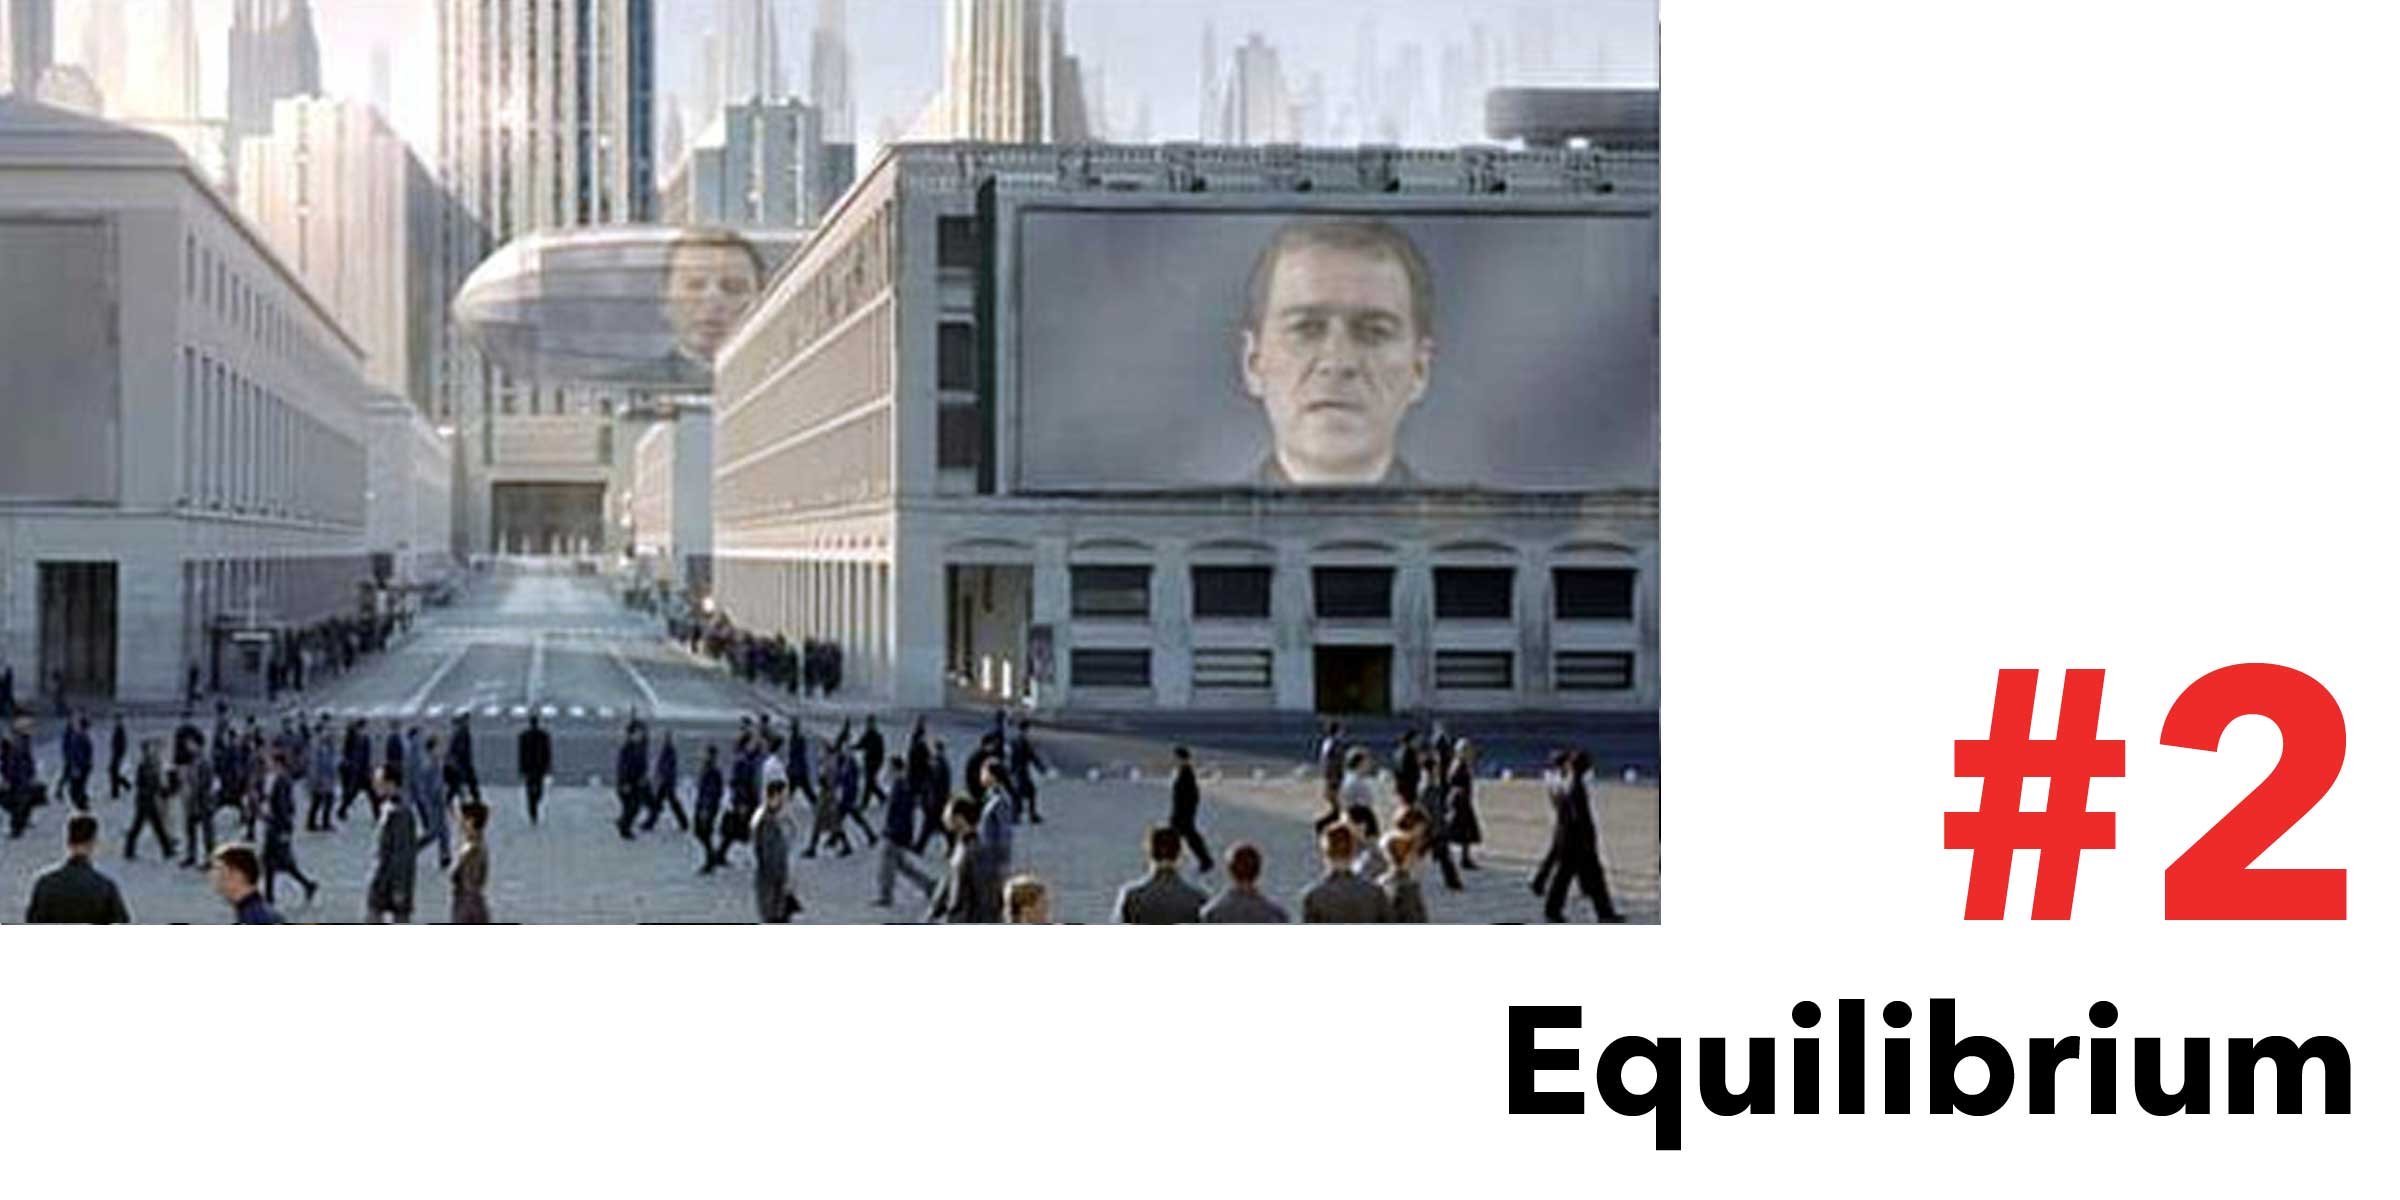 Equilibrium is #2 in the Top 10 Post Apocalyptic Movies on Netflix. Pictured, a city full of people in suits walk with with purpose as a broadcast is projected on screens and a Zeppelin.